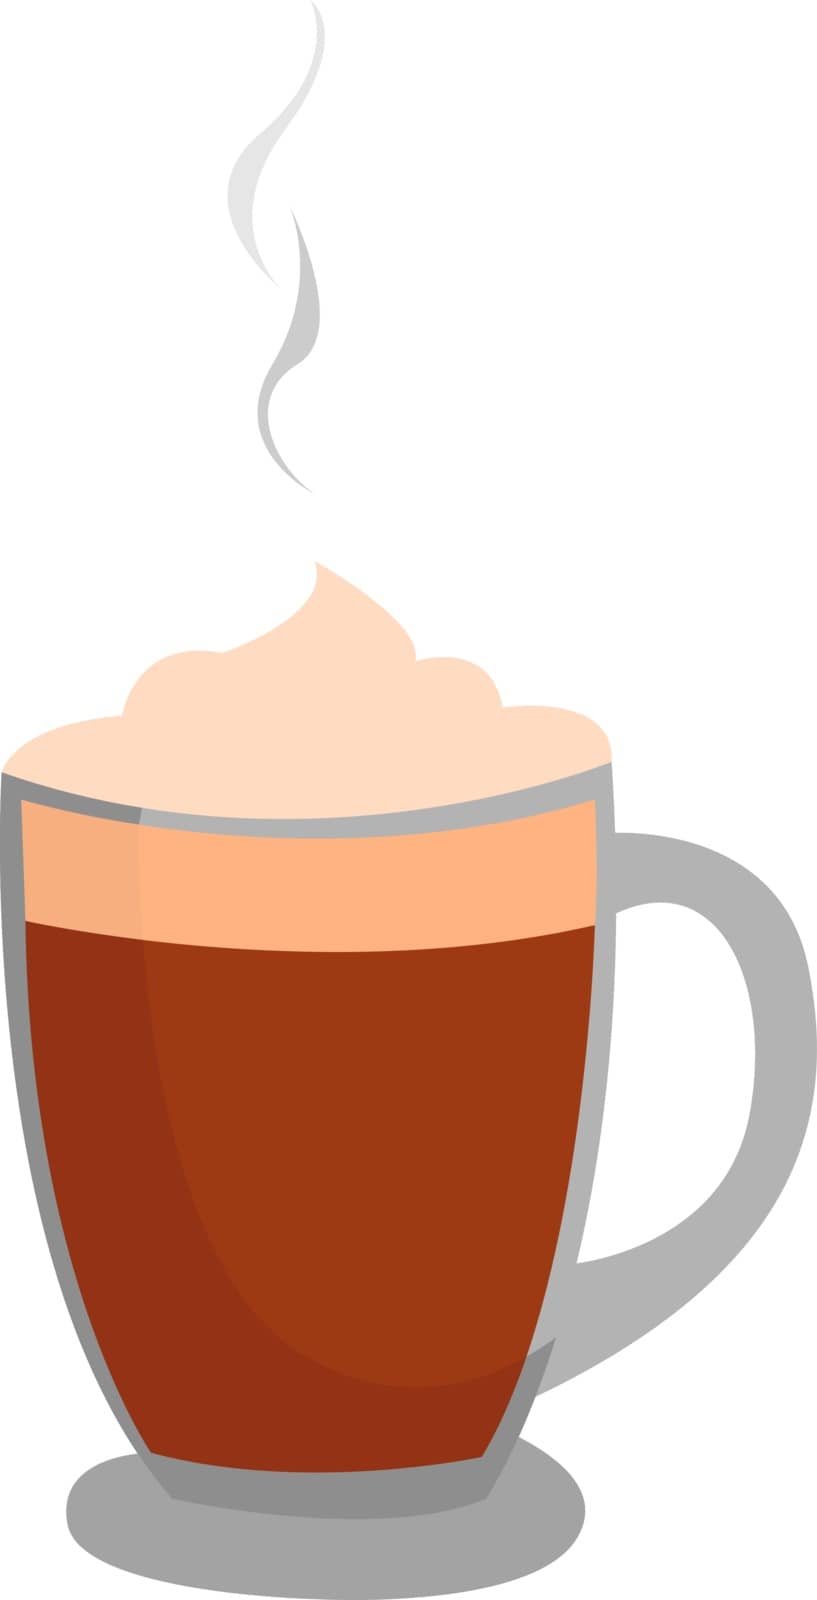 Morning coffee, illustration, vector on white background. by Morphart